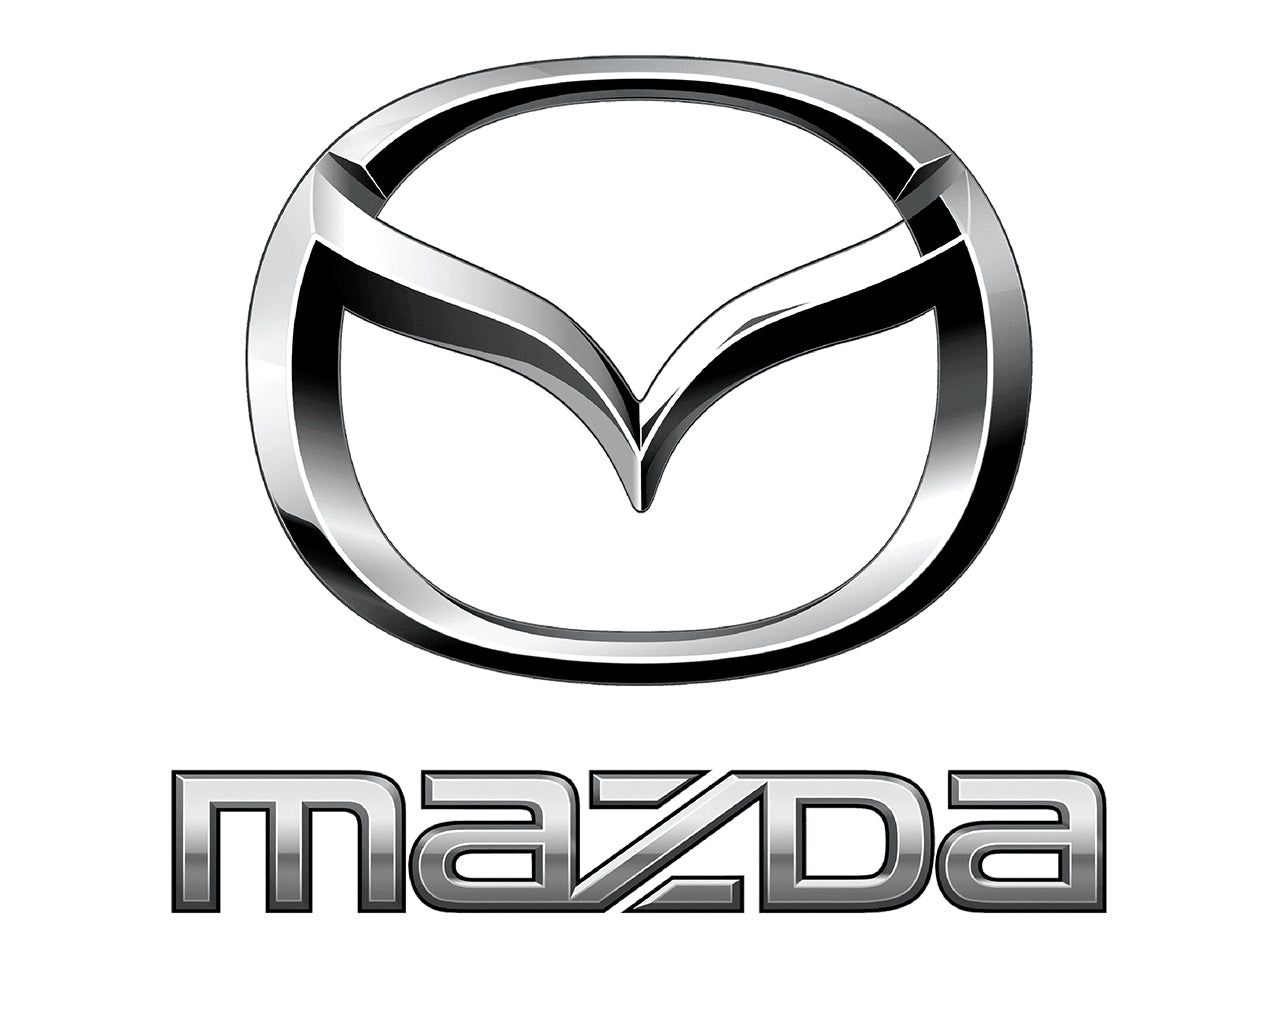 Square circle with two sections making a point in the center, the symbol is above a word that spells MAZDA in all caps